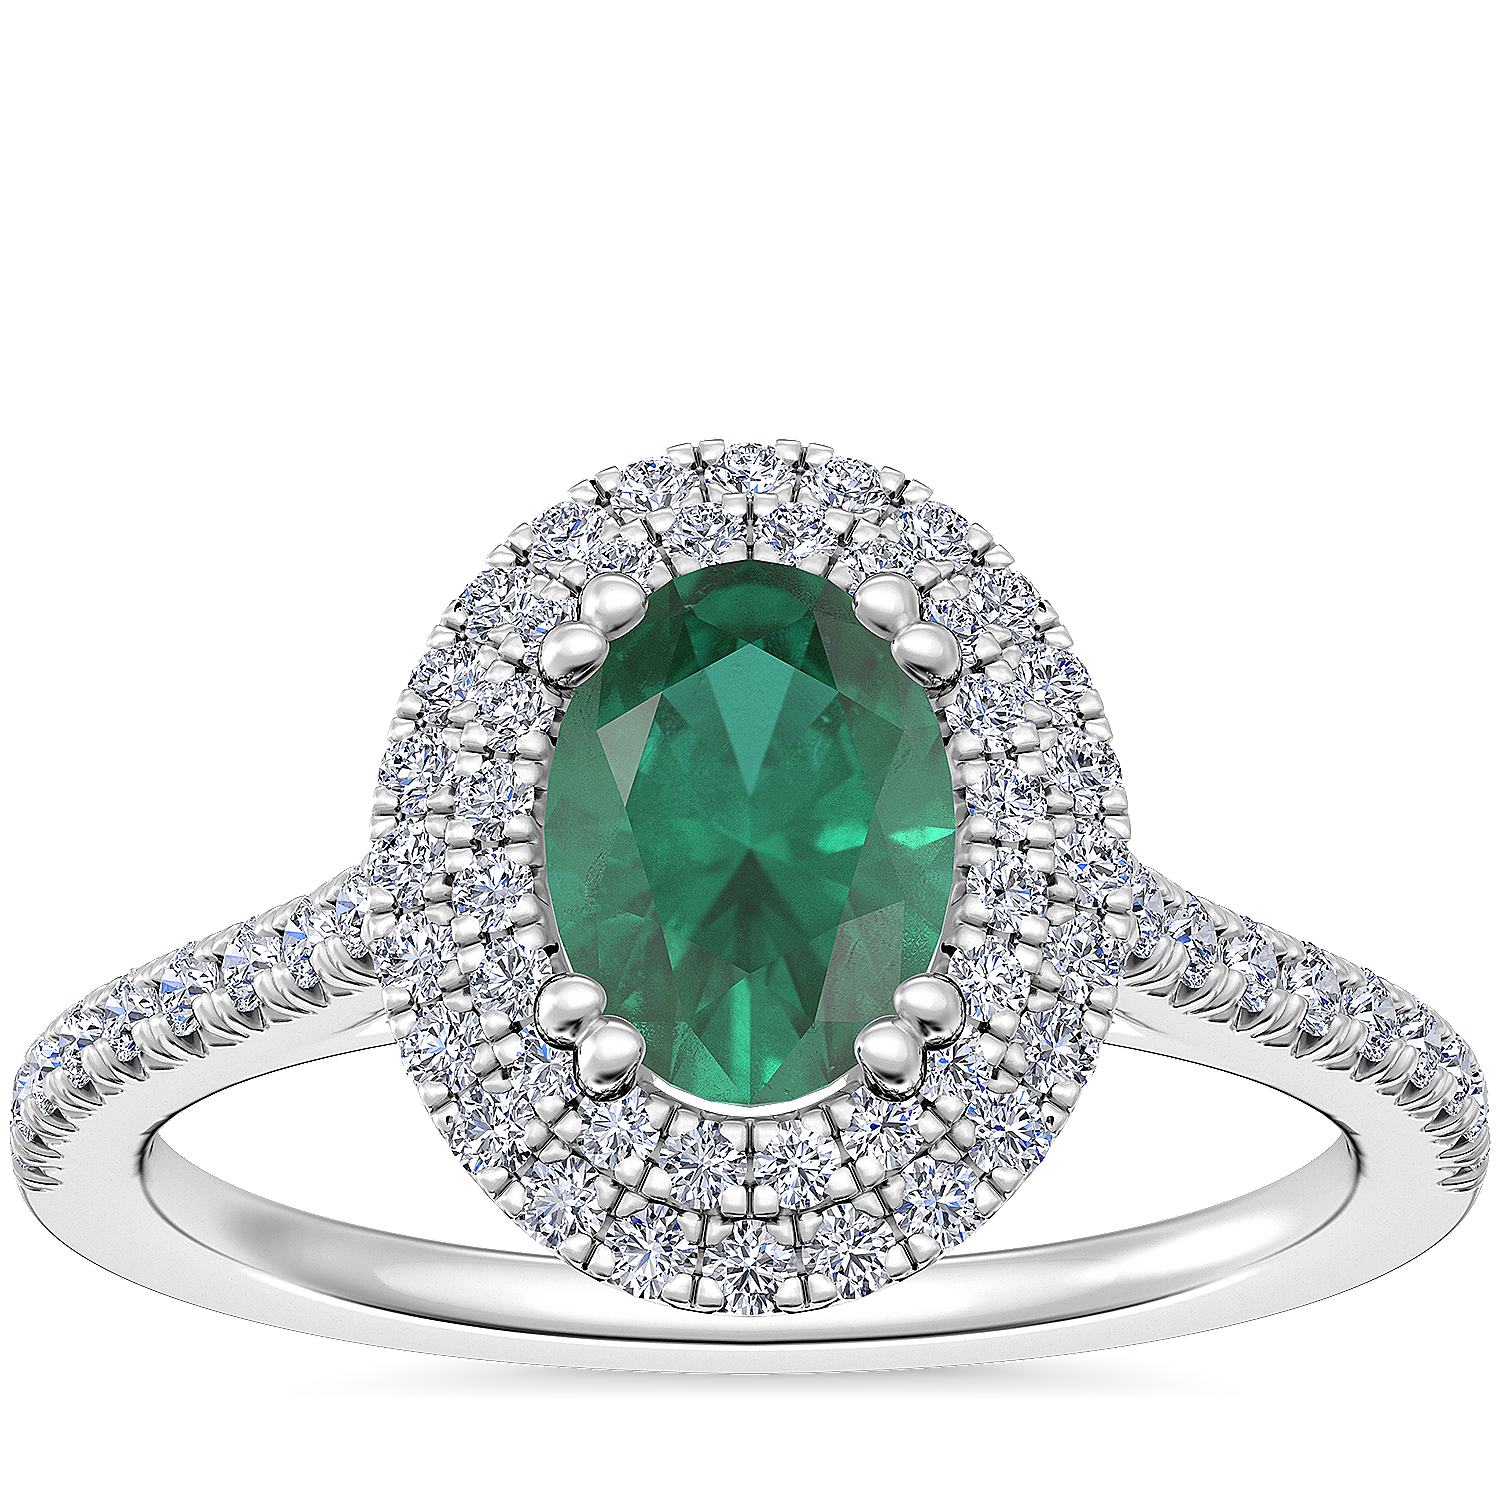 Micropave Double Halo Diamond Engagement Ring with Oval Emerald in 14k White Gold (7x5mm)